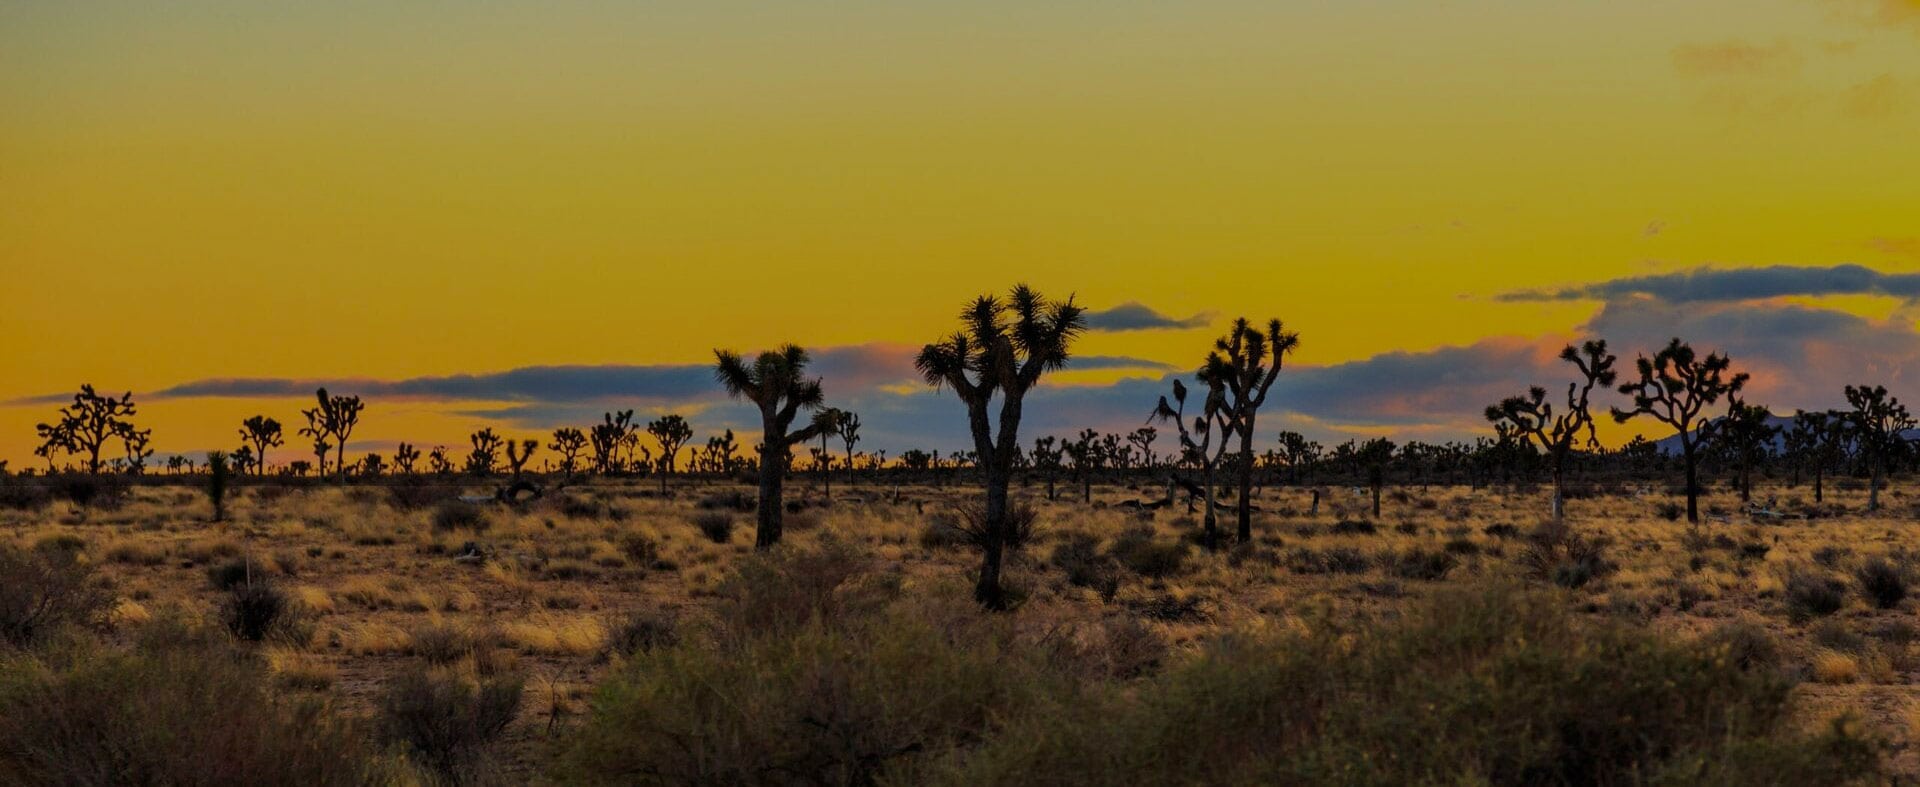 Planning a trip to Joshua Tree National Park